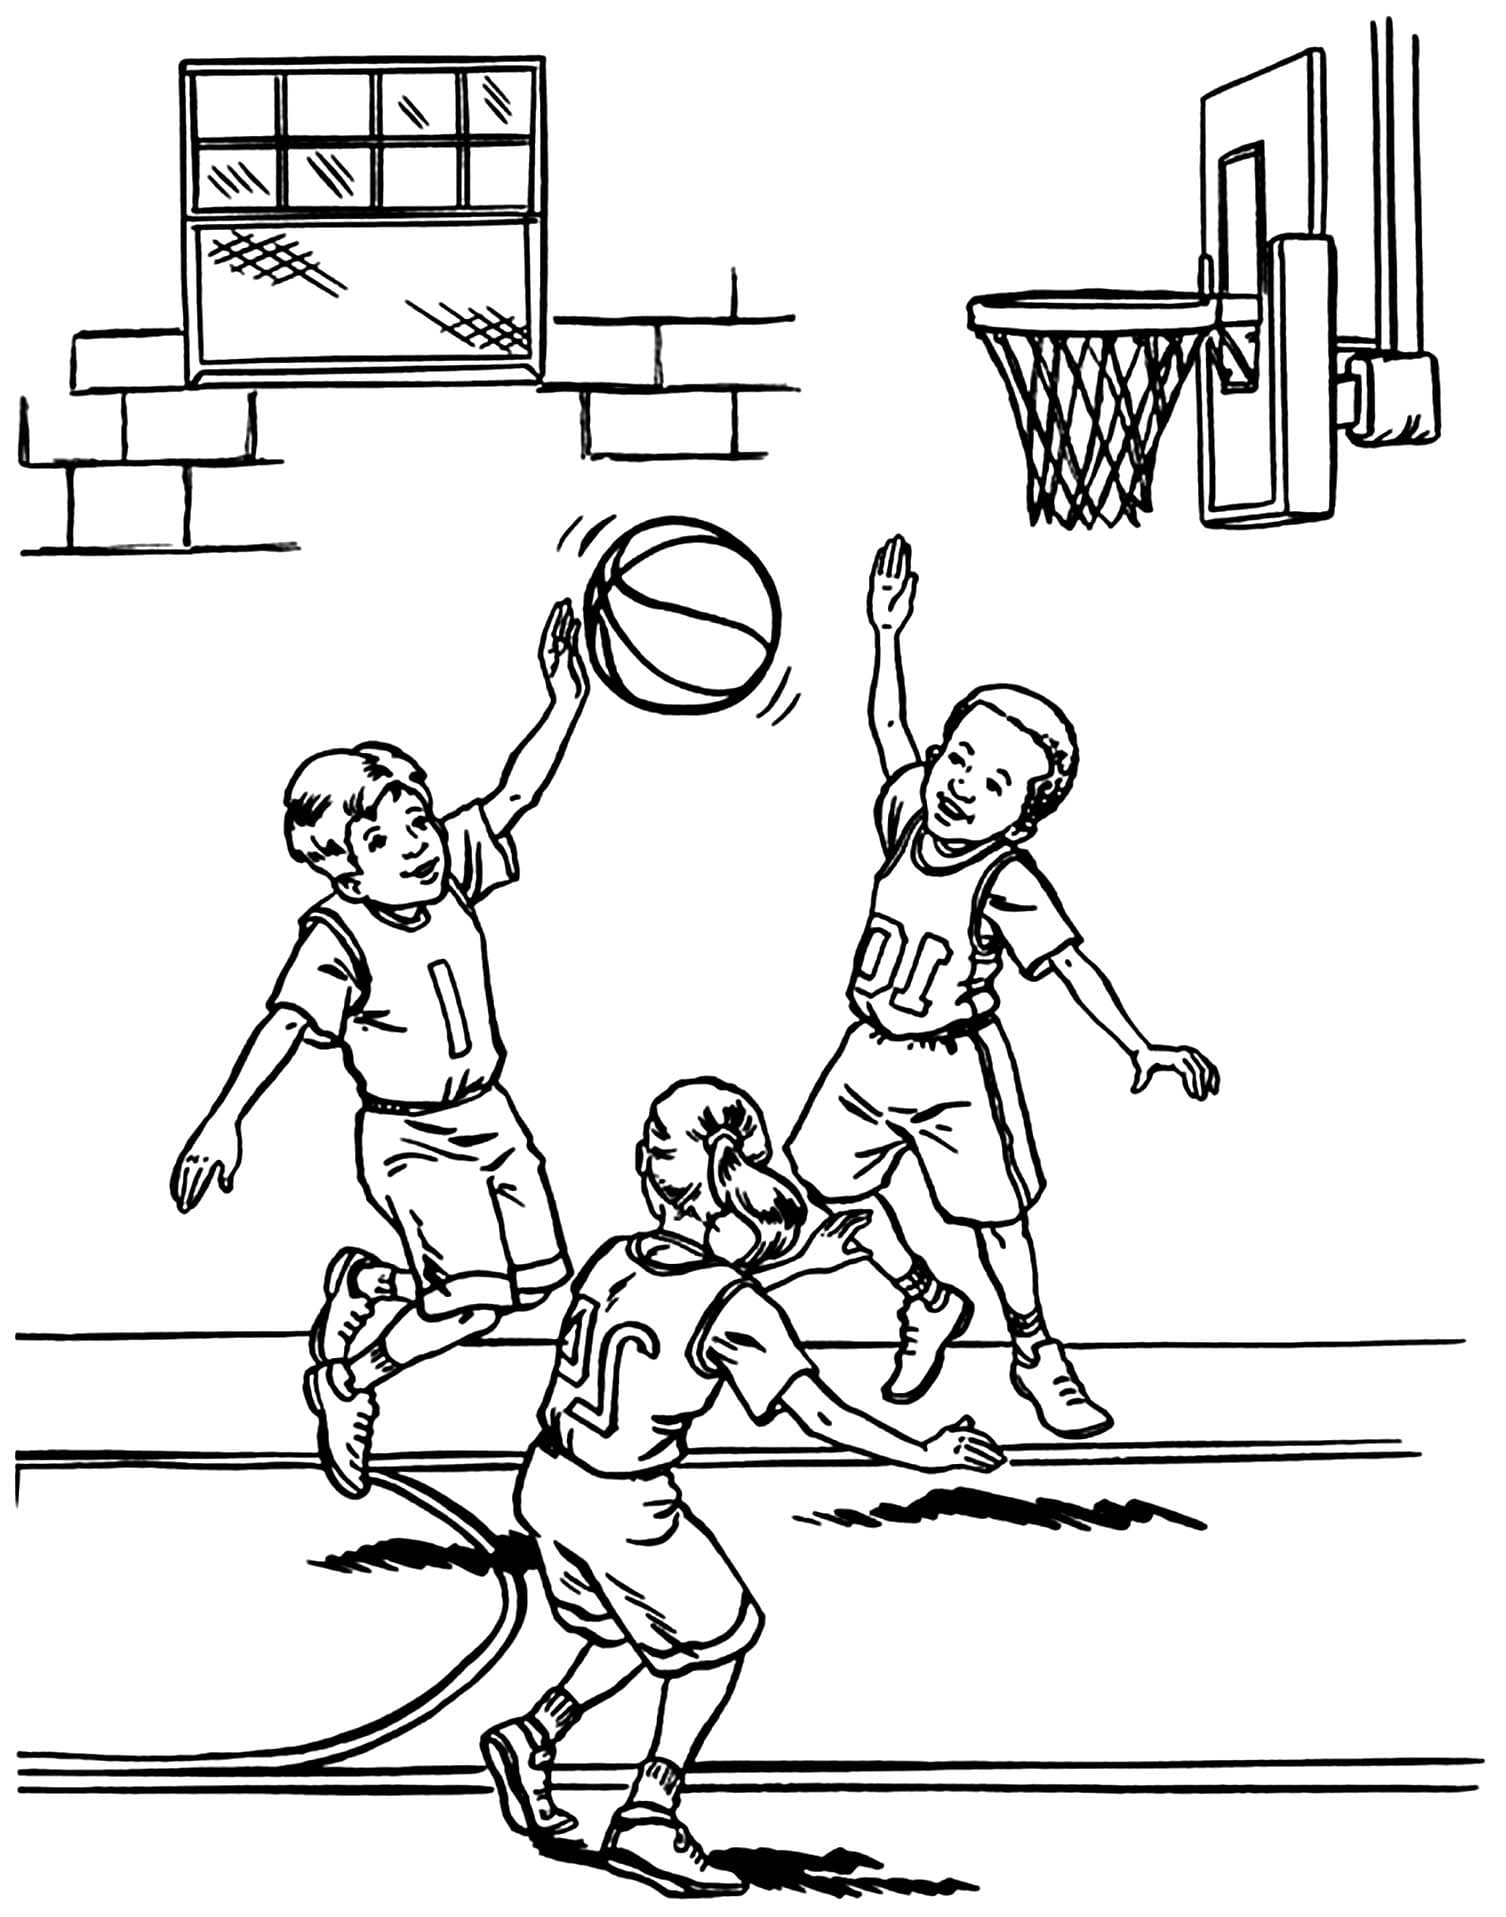 The Kids Playing Basketball Coloring Page